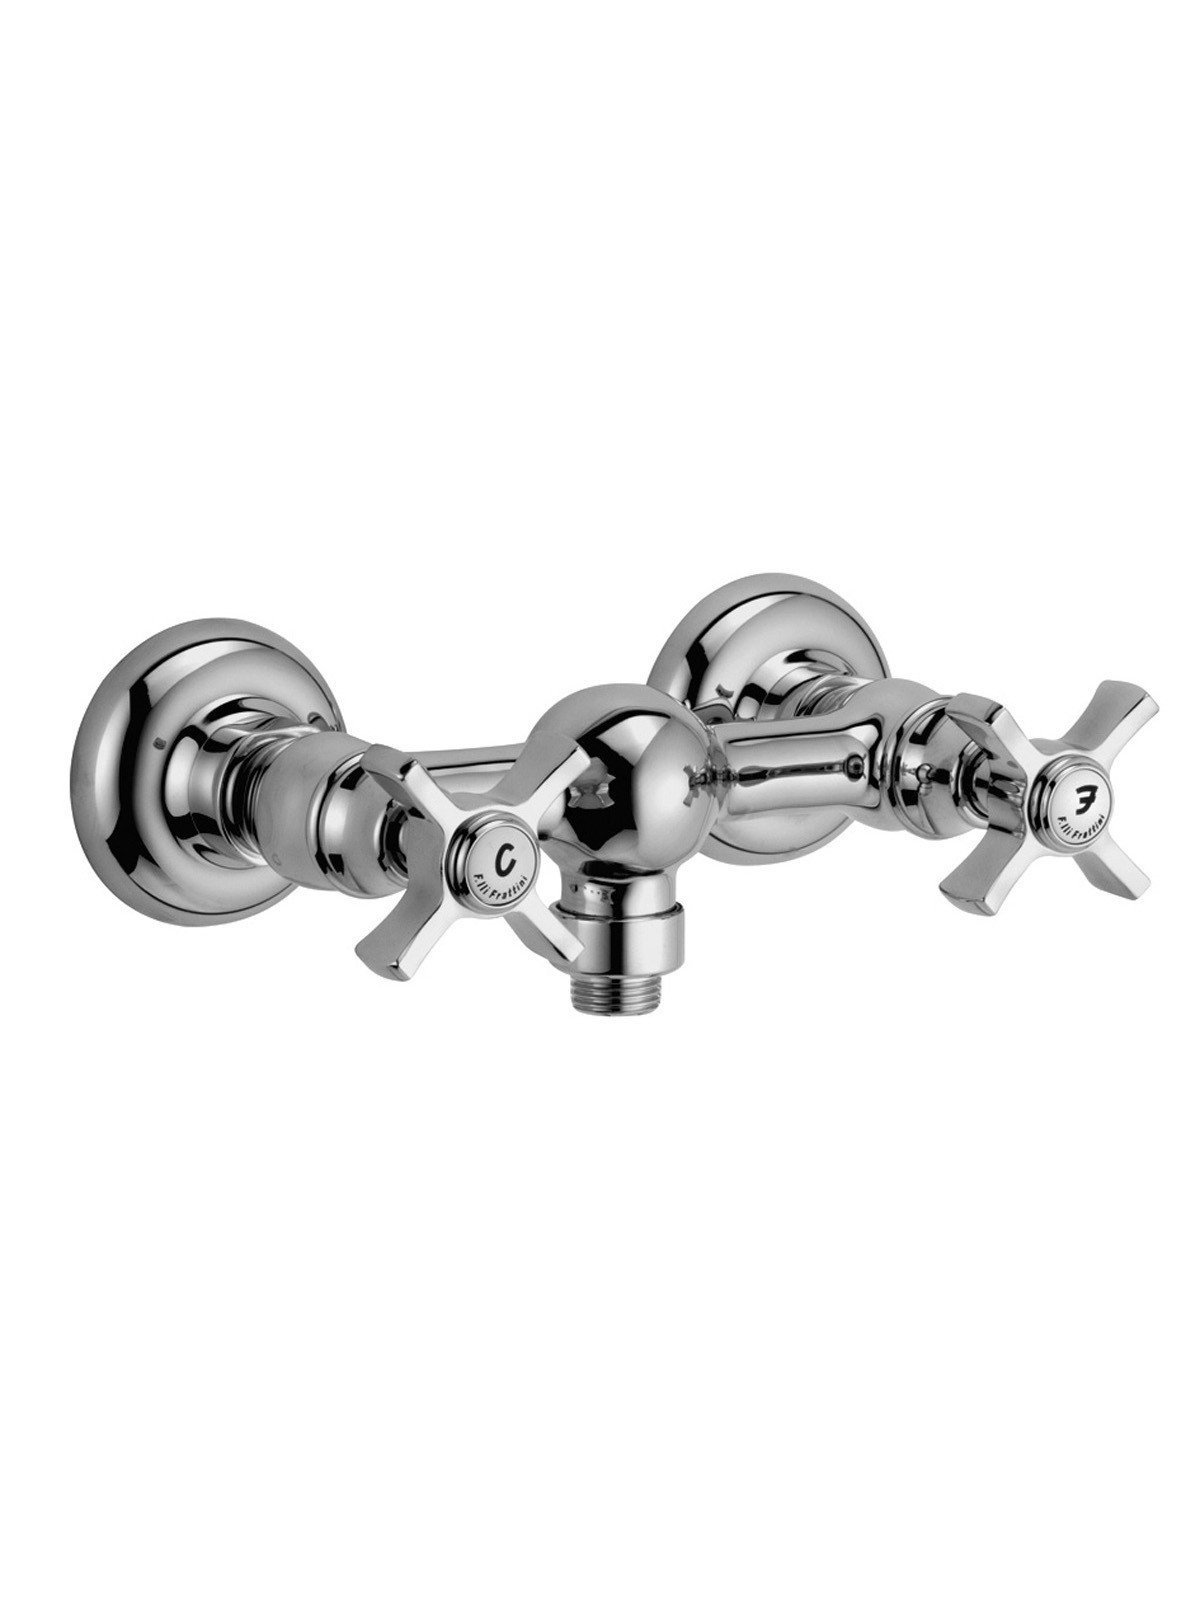 External shower mixer with 3/4px1/2p lower connection